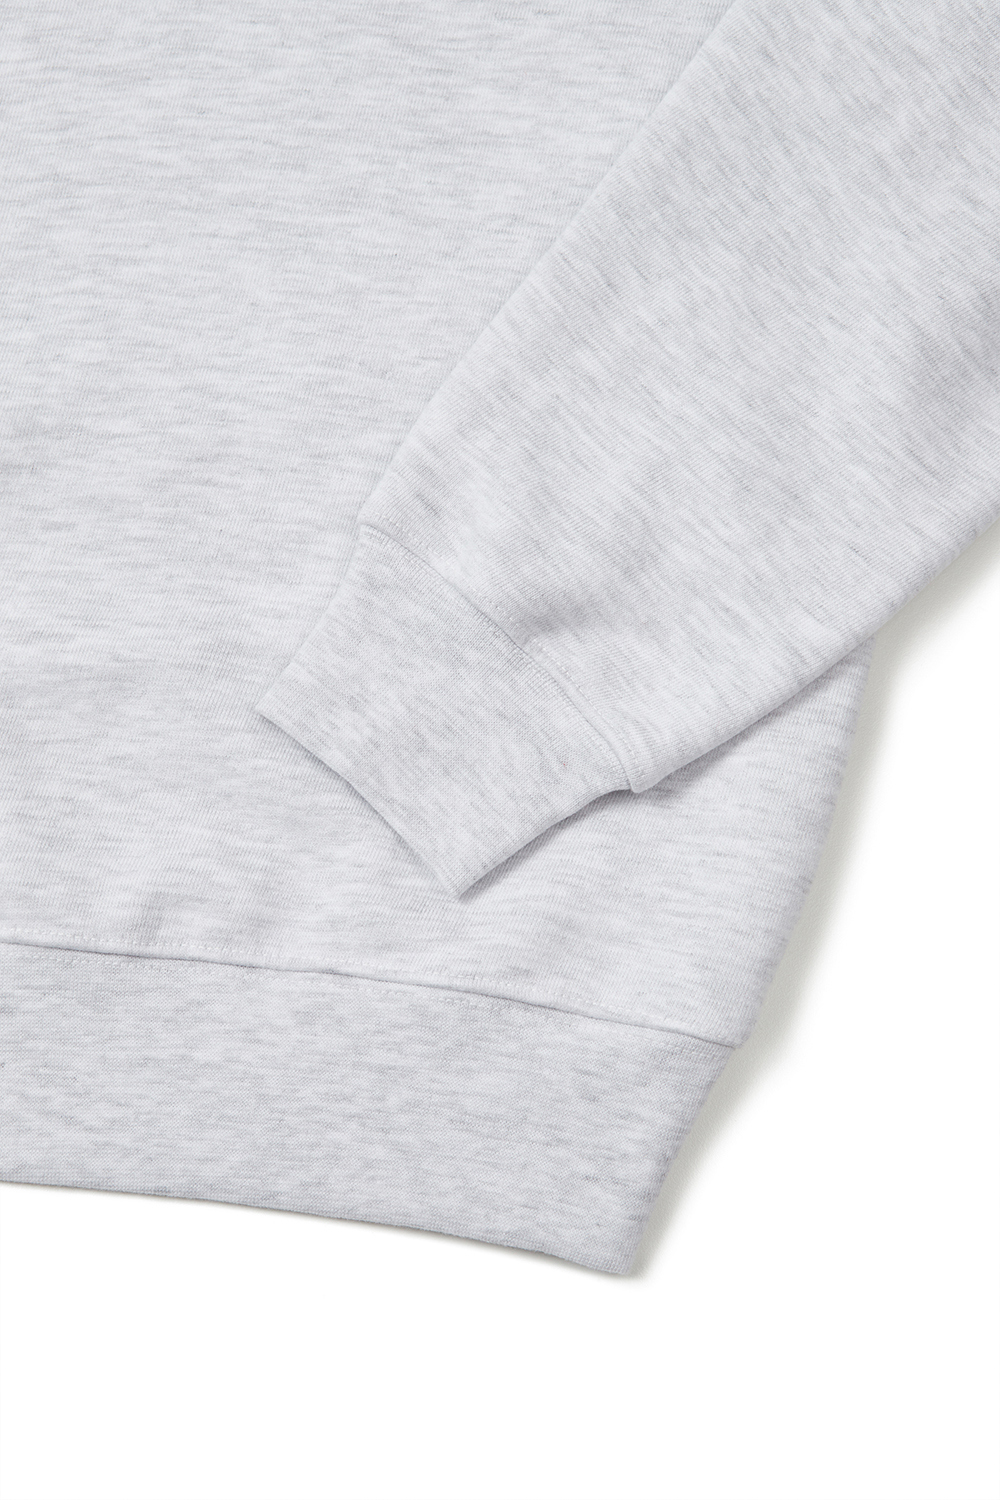 long sleeved tee detail image-S52L5